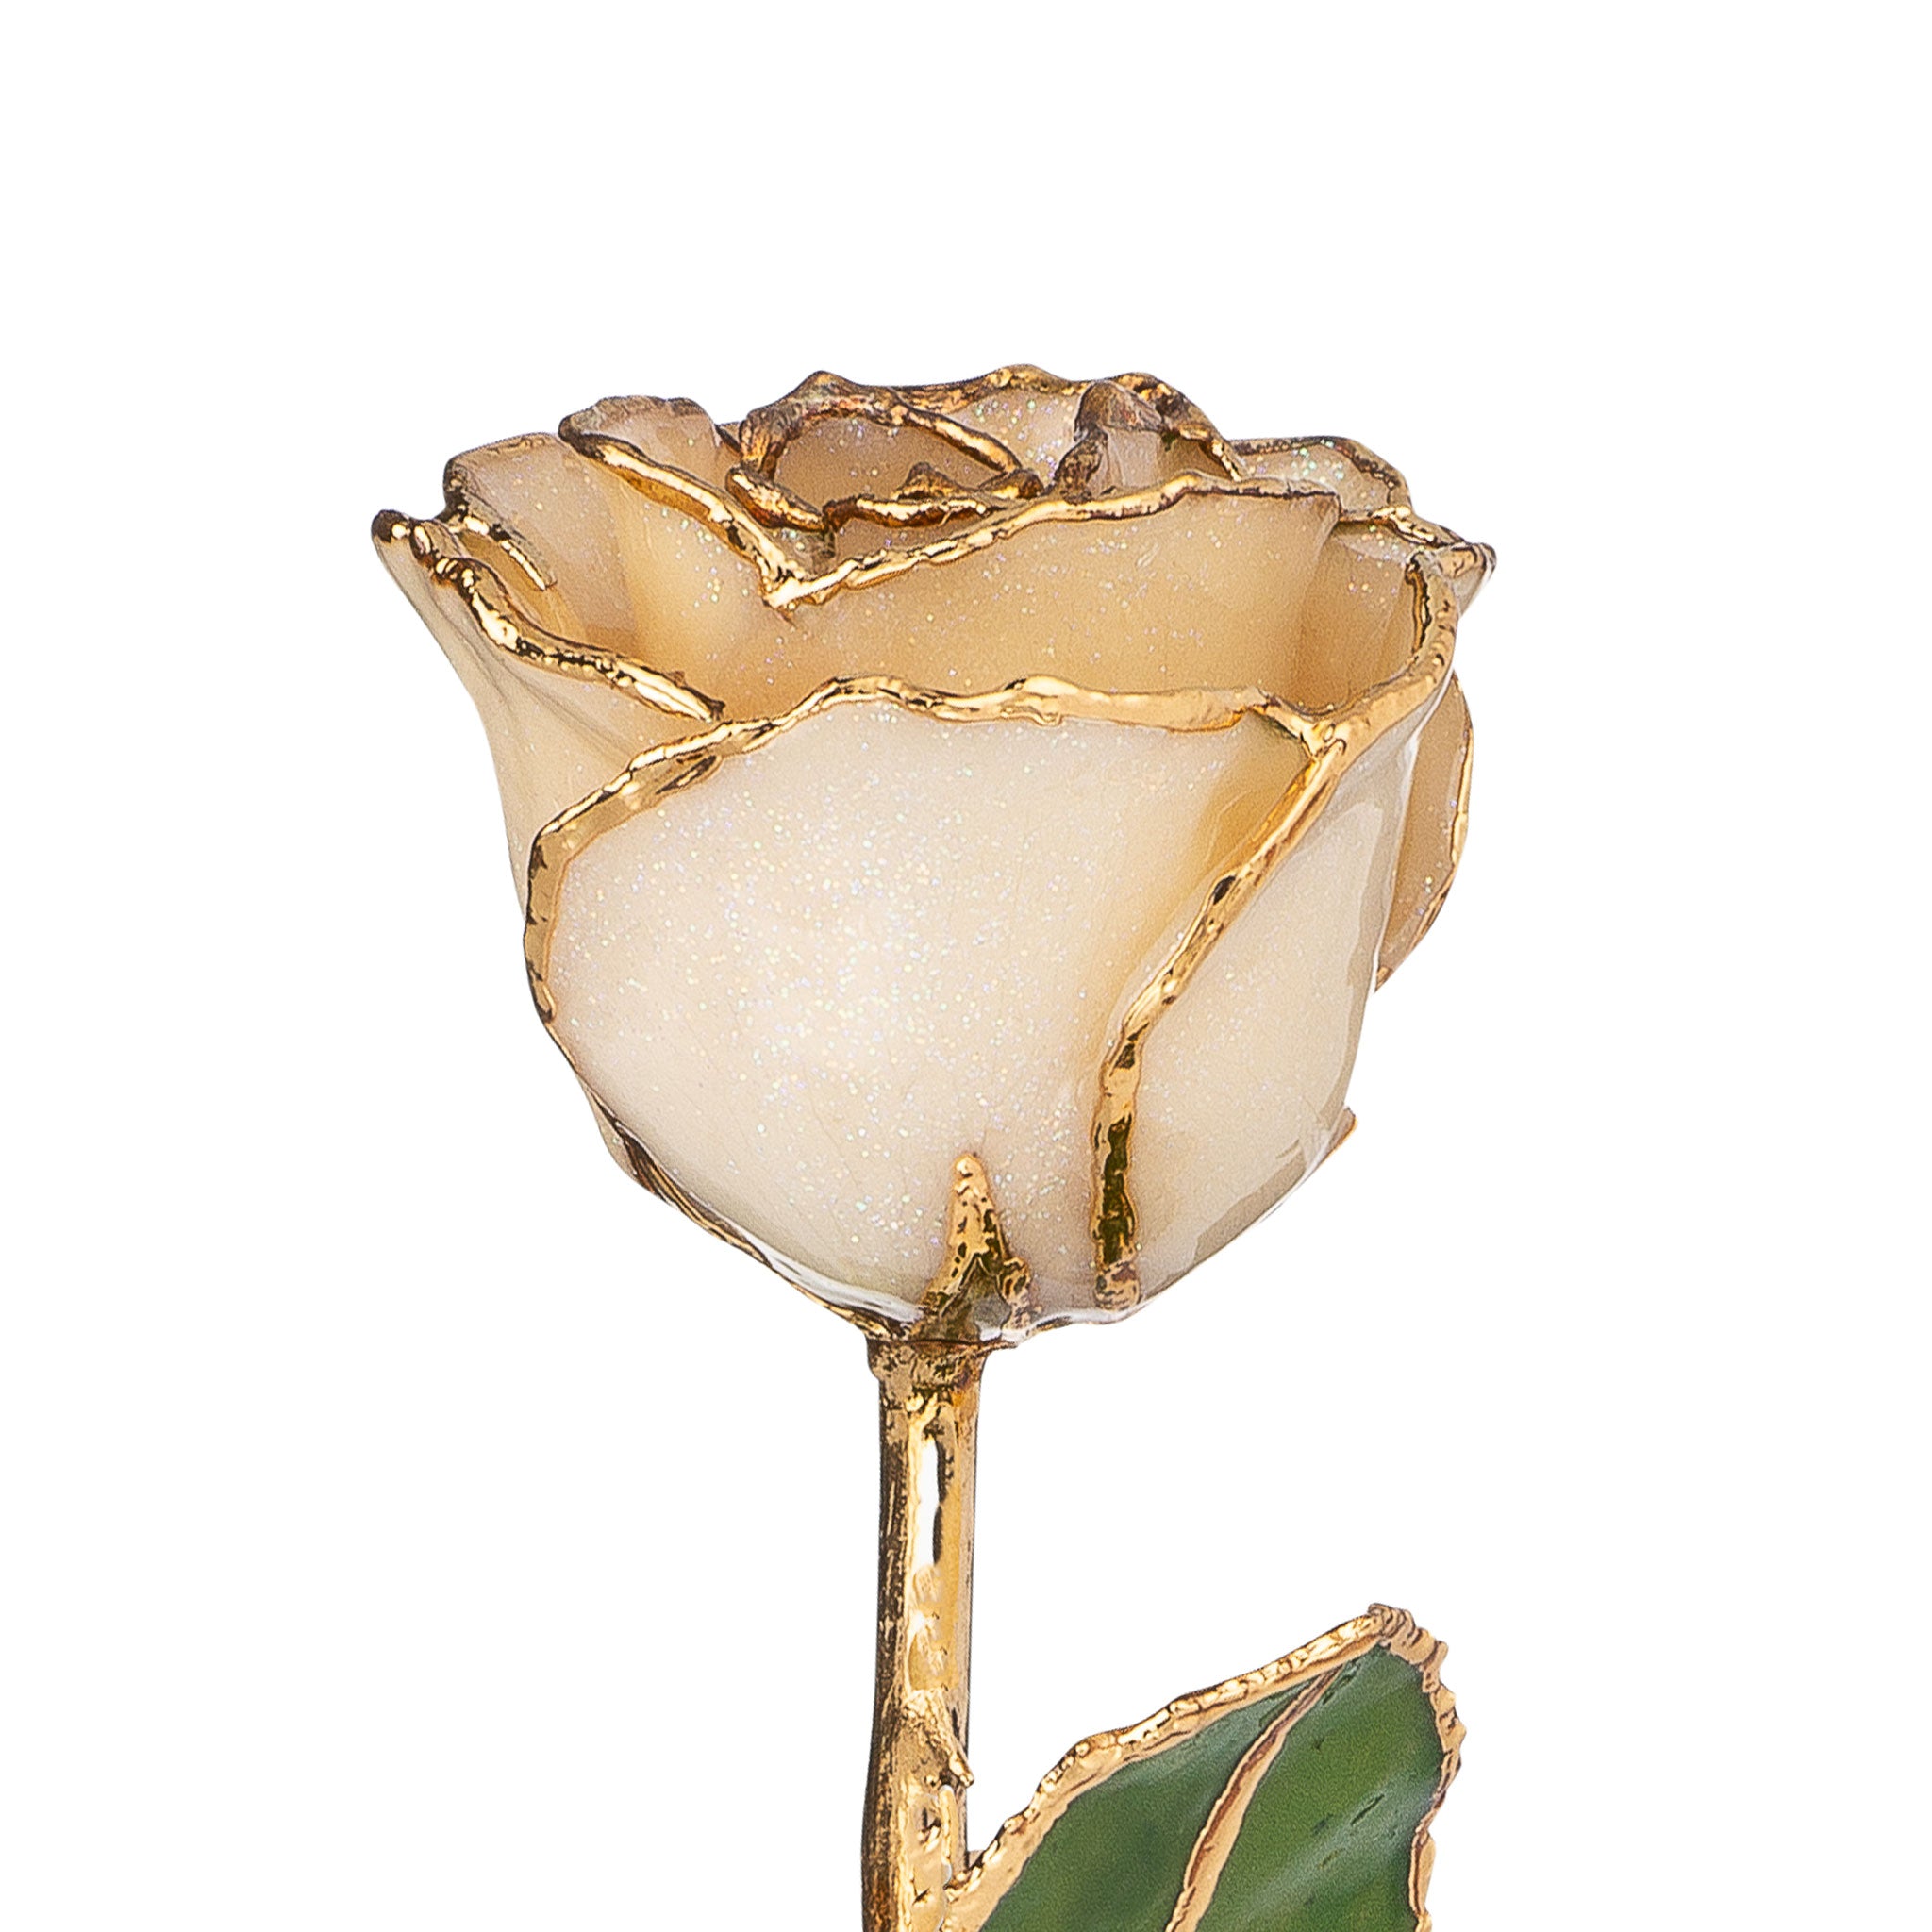 24K Gold Trimmed Forever Rose with Diamond Petals with Sparkles. View of Stem, Leaves, and Rose Petals and Showing Detail of Gold Trim